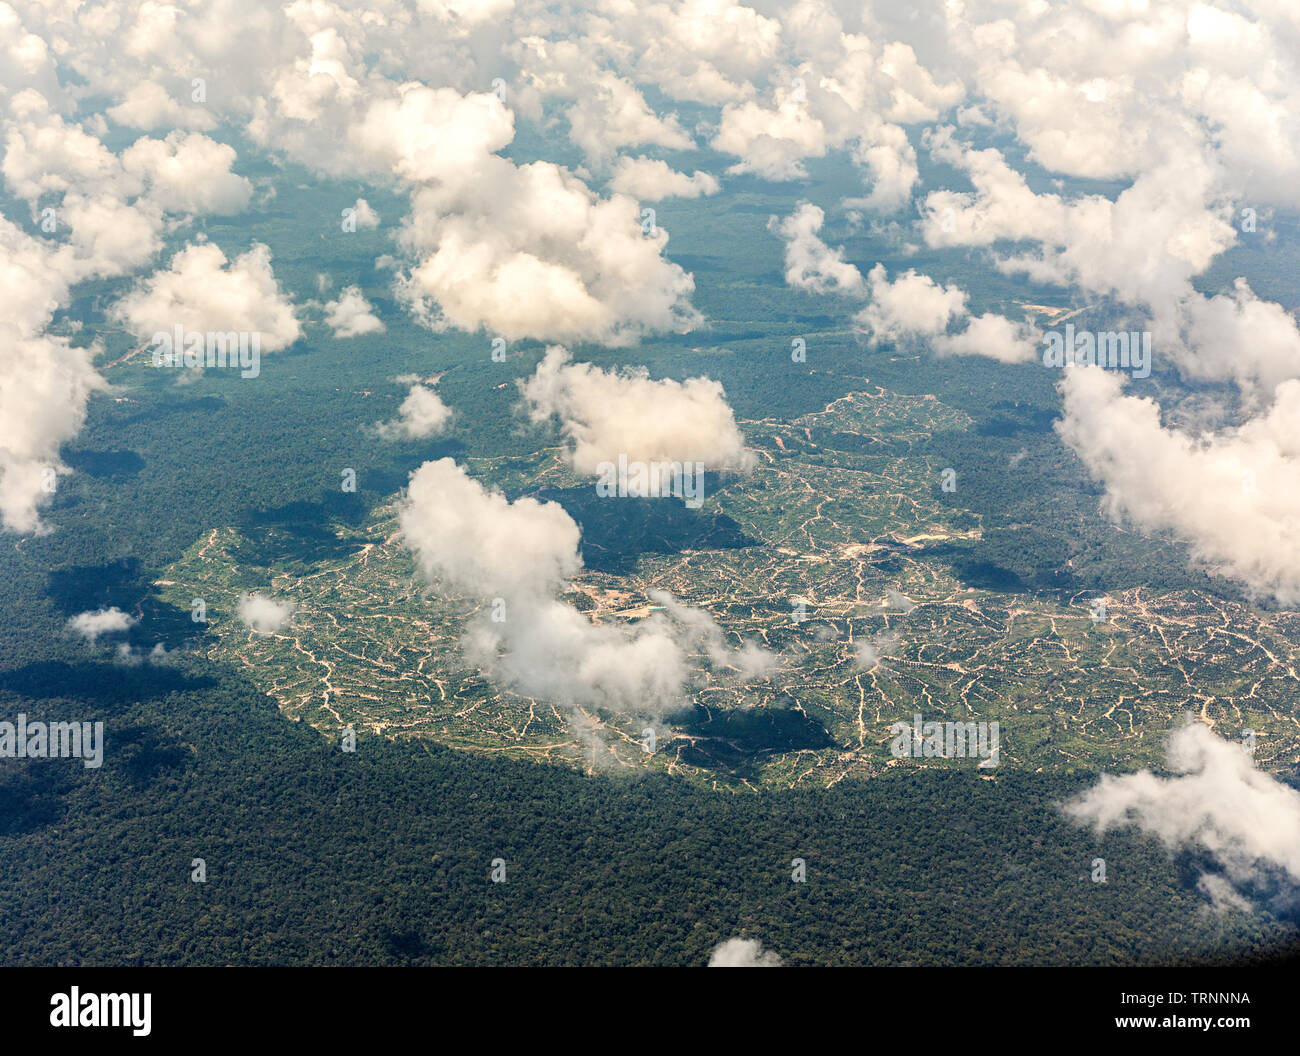 Deforestation for palm oil plantation on the border of Malaysia (clearance) and Brunei native rainforest), Mulu, Malaysia Stock Photo